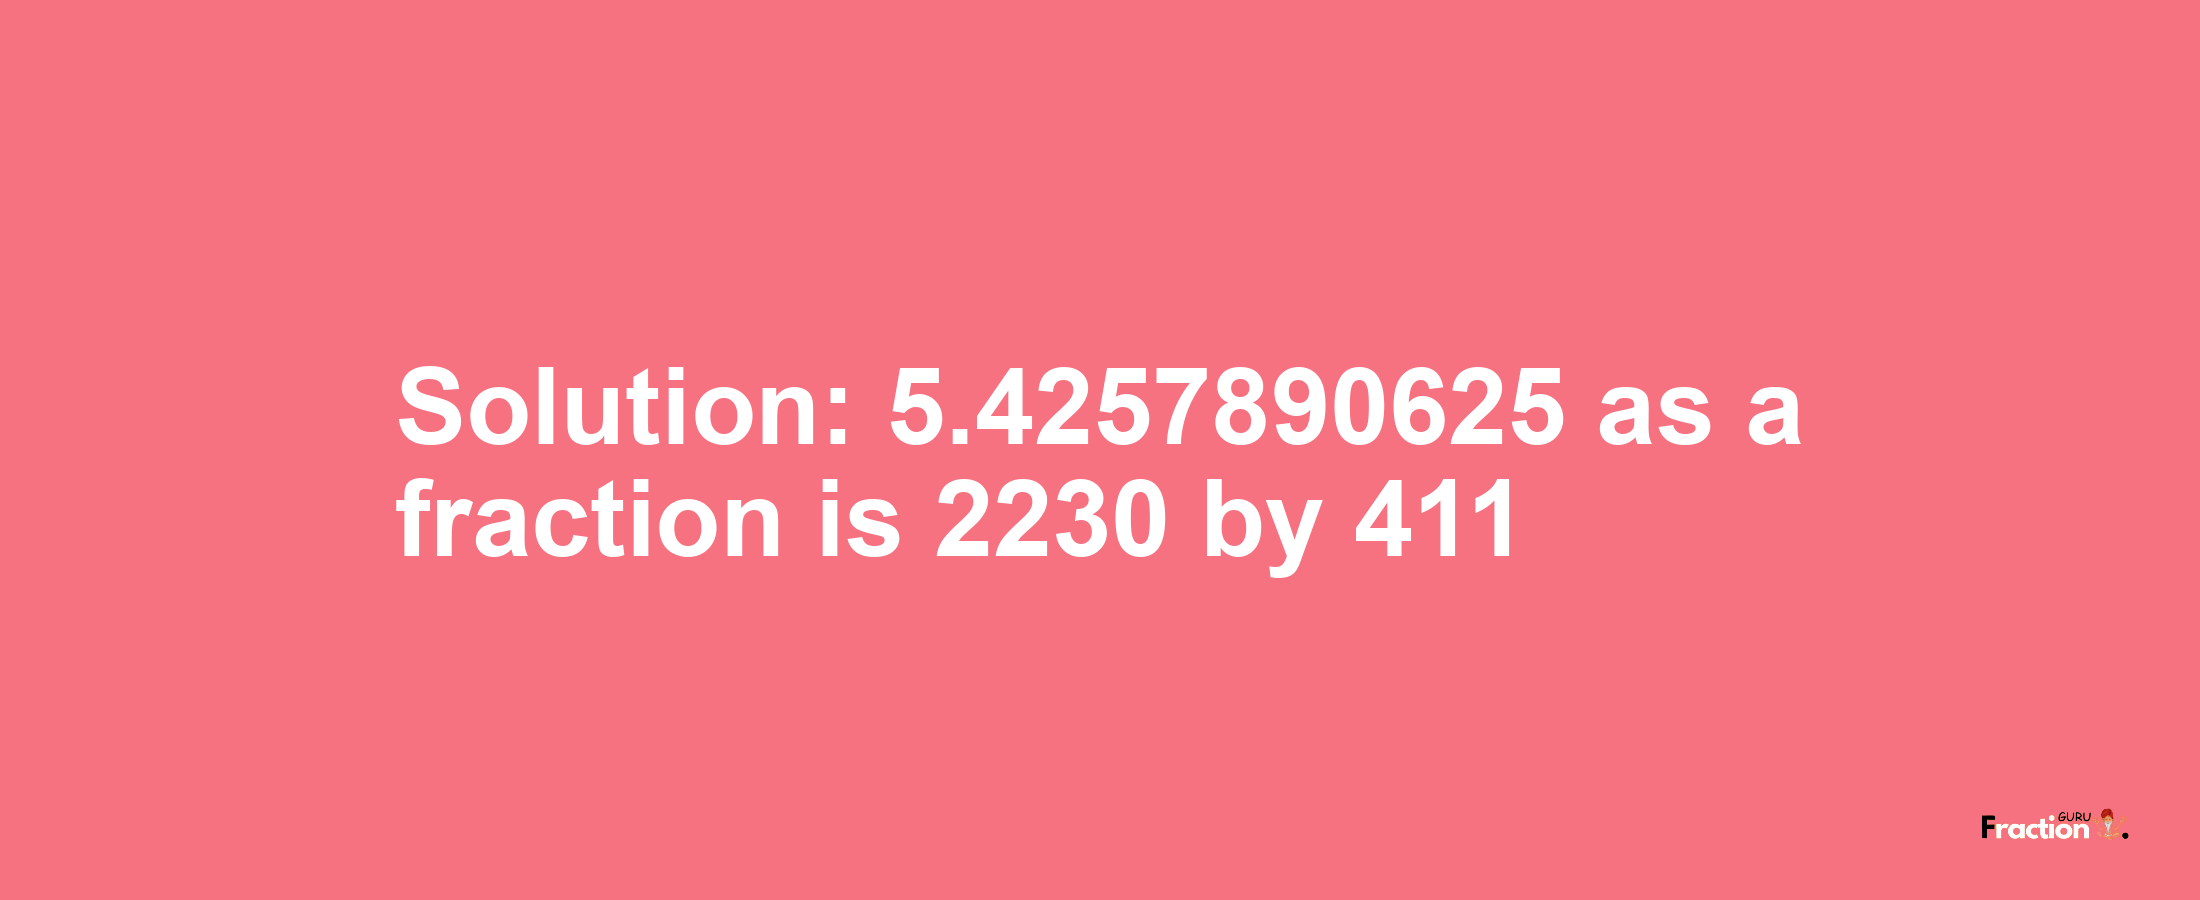 Solution:5.4257890625 as a fraction is 2230/411